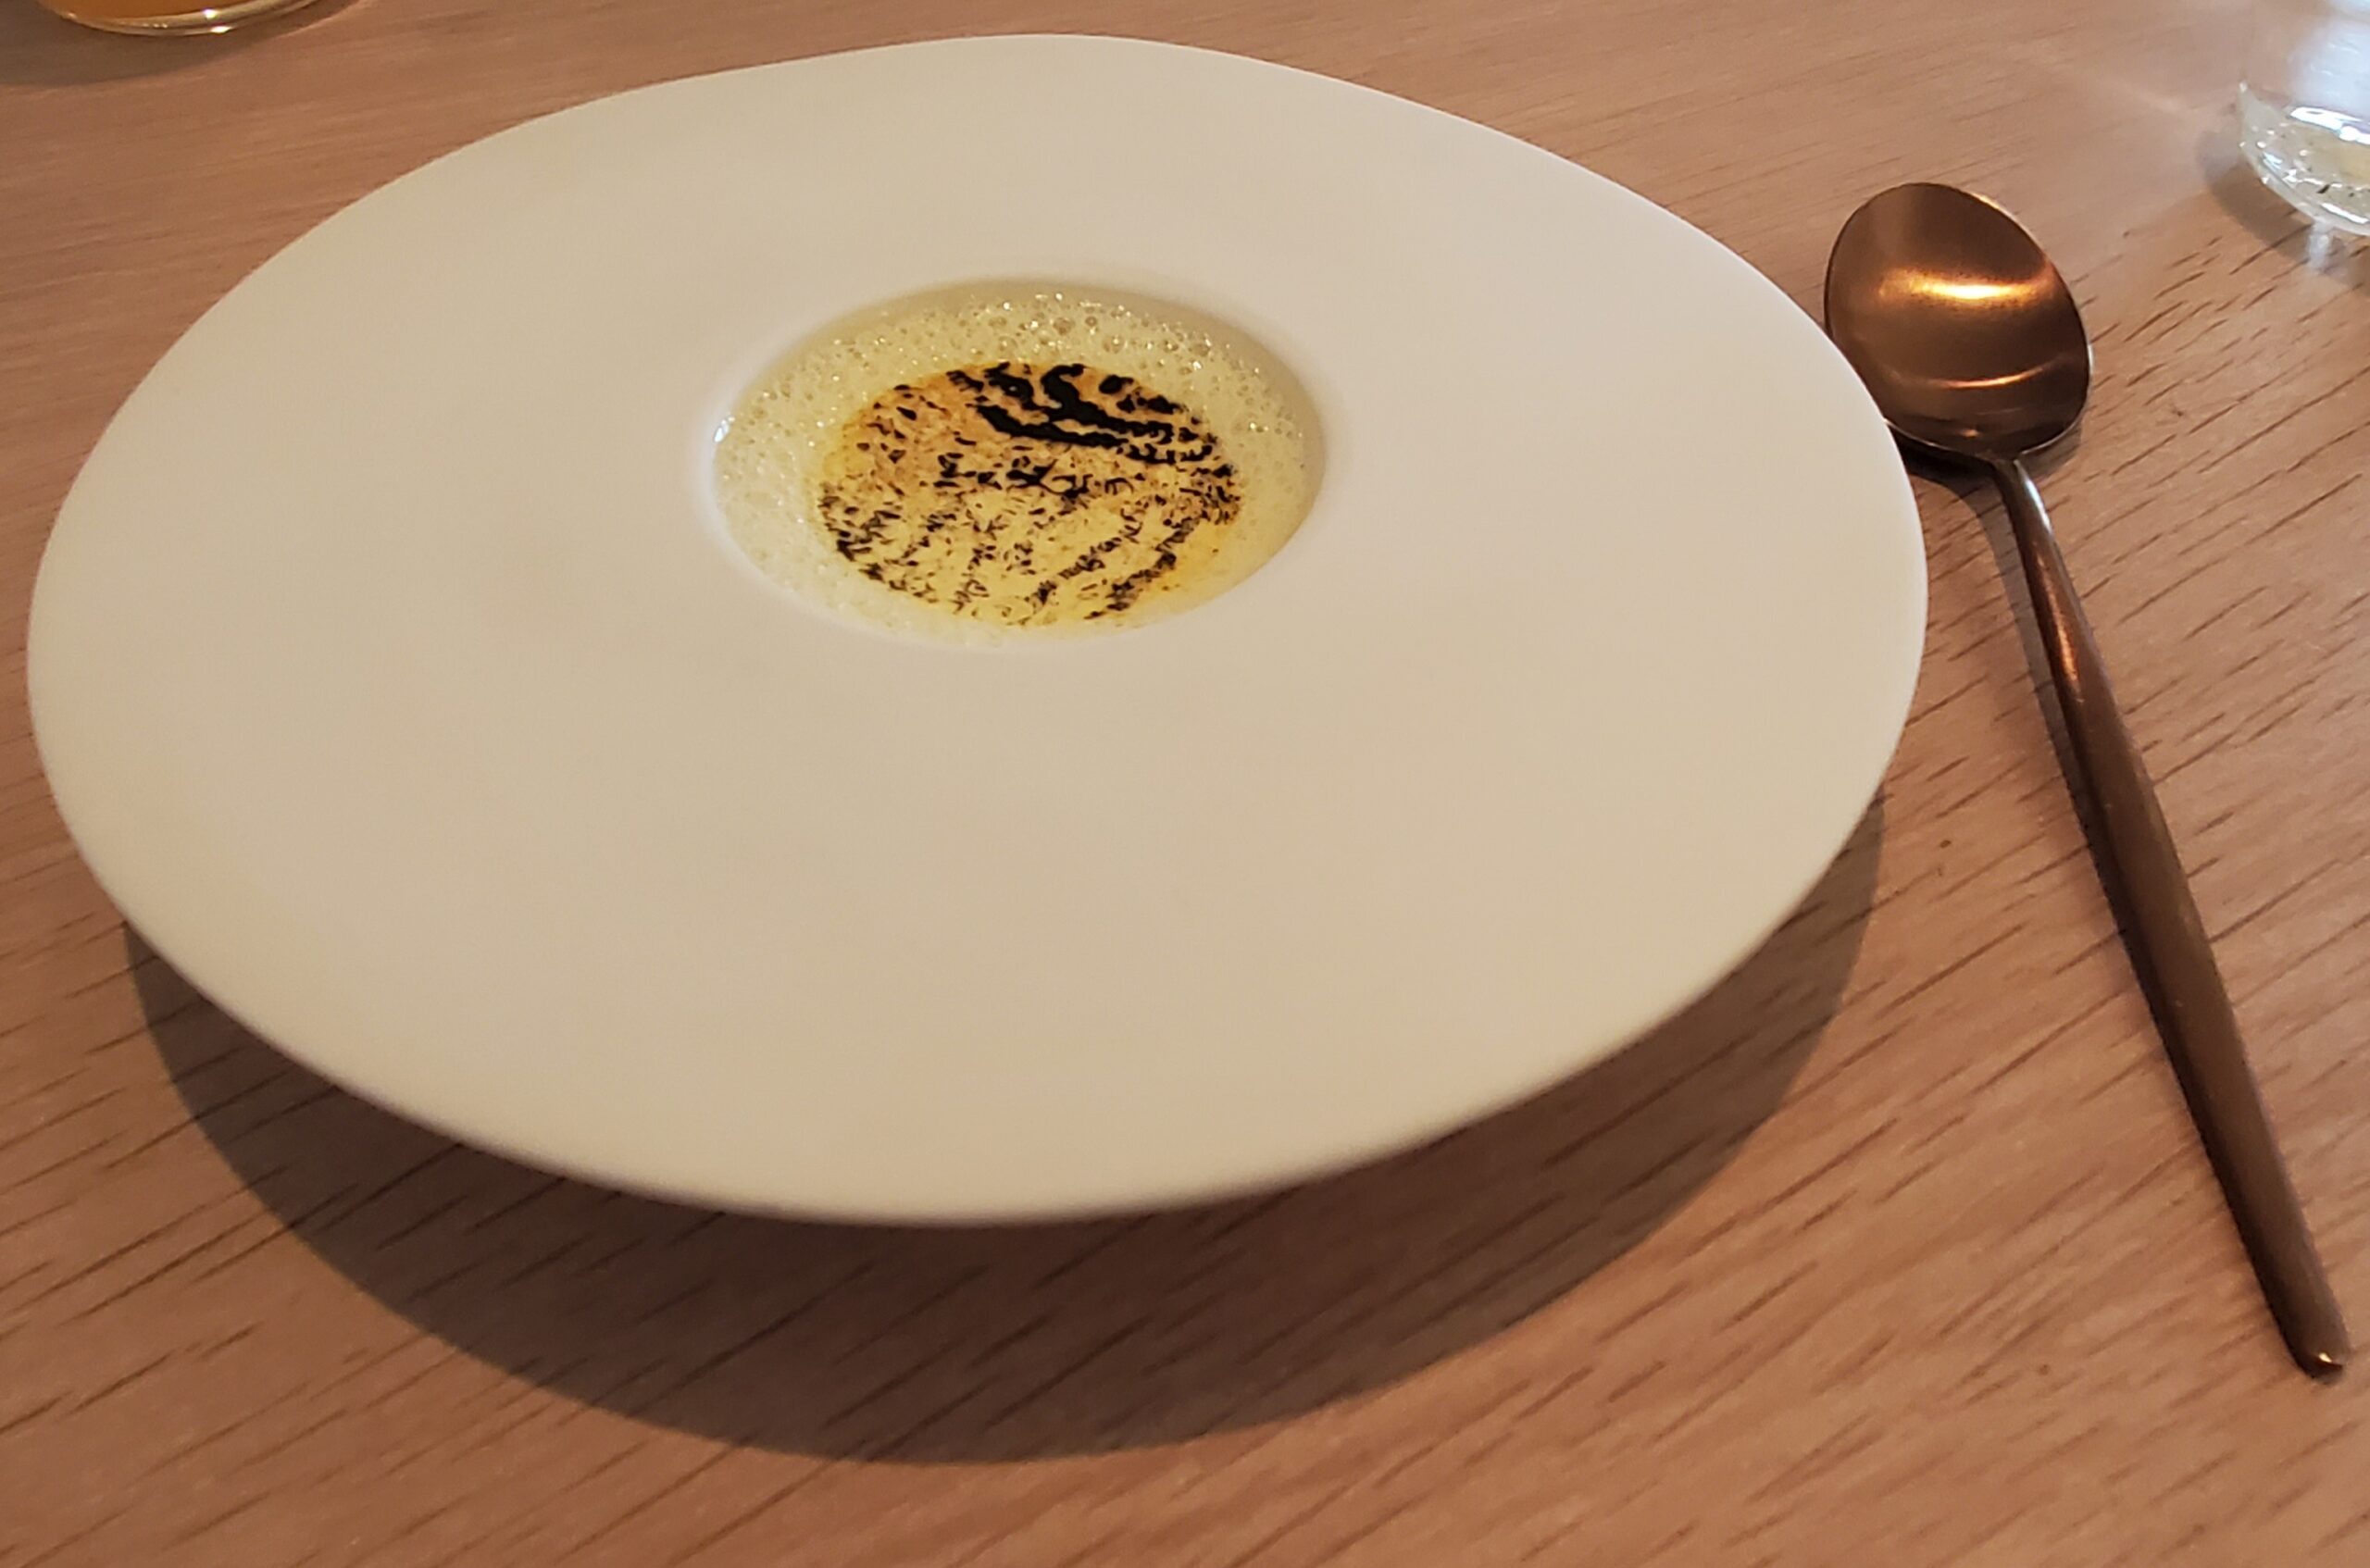 a plate with a white circle with a brown substance in it